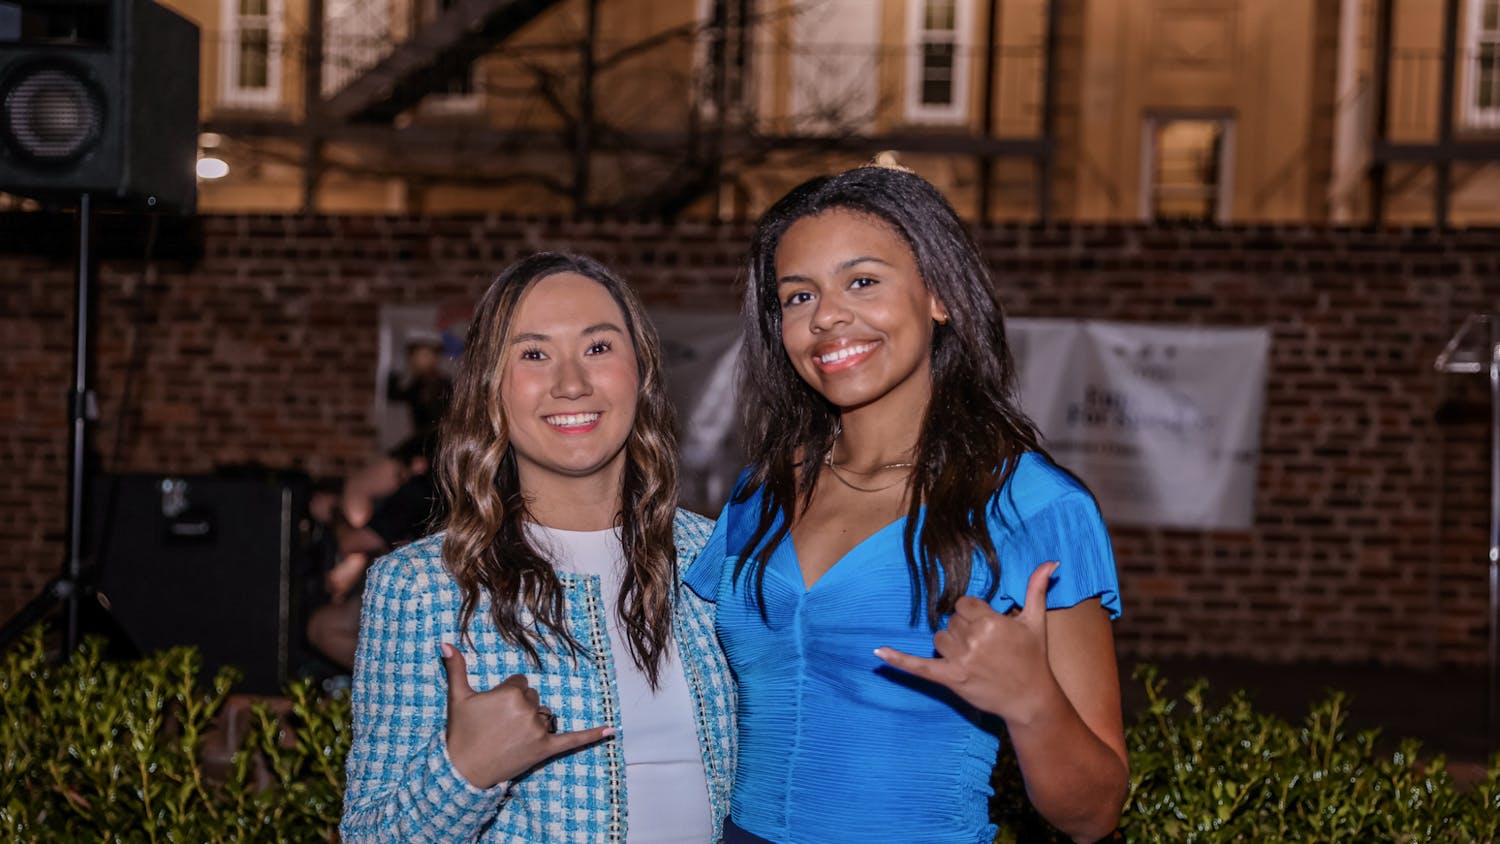 Third-year public relations student Emmie Thompson and second-year finance and marketing student Abrianna Reaves pose together as the University of South Carolina’s new student body president and vice president on Feb. 22, 2023. Thompson and Reaves campaigned together as running mates for the election.